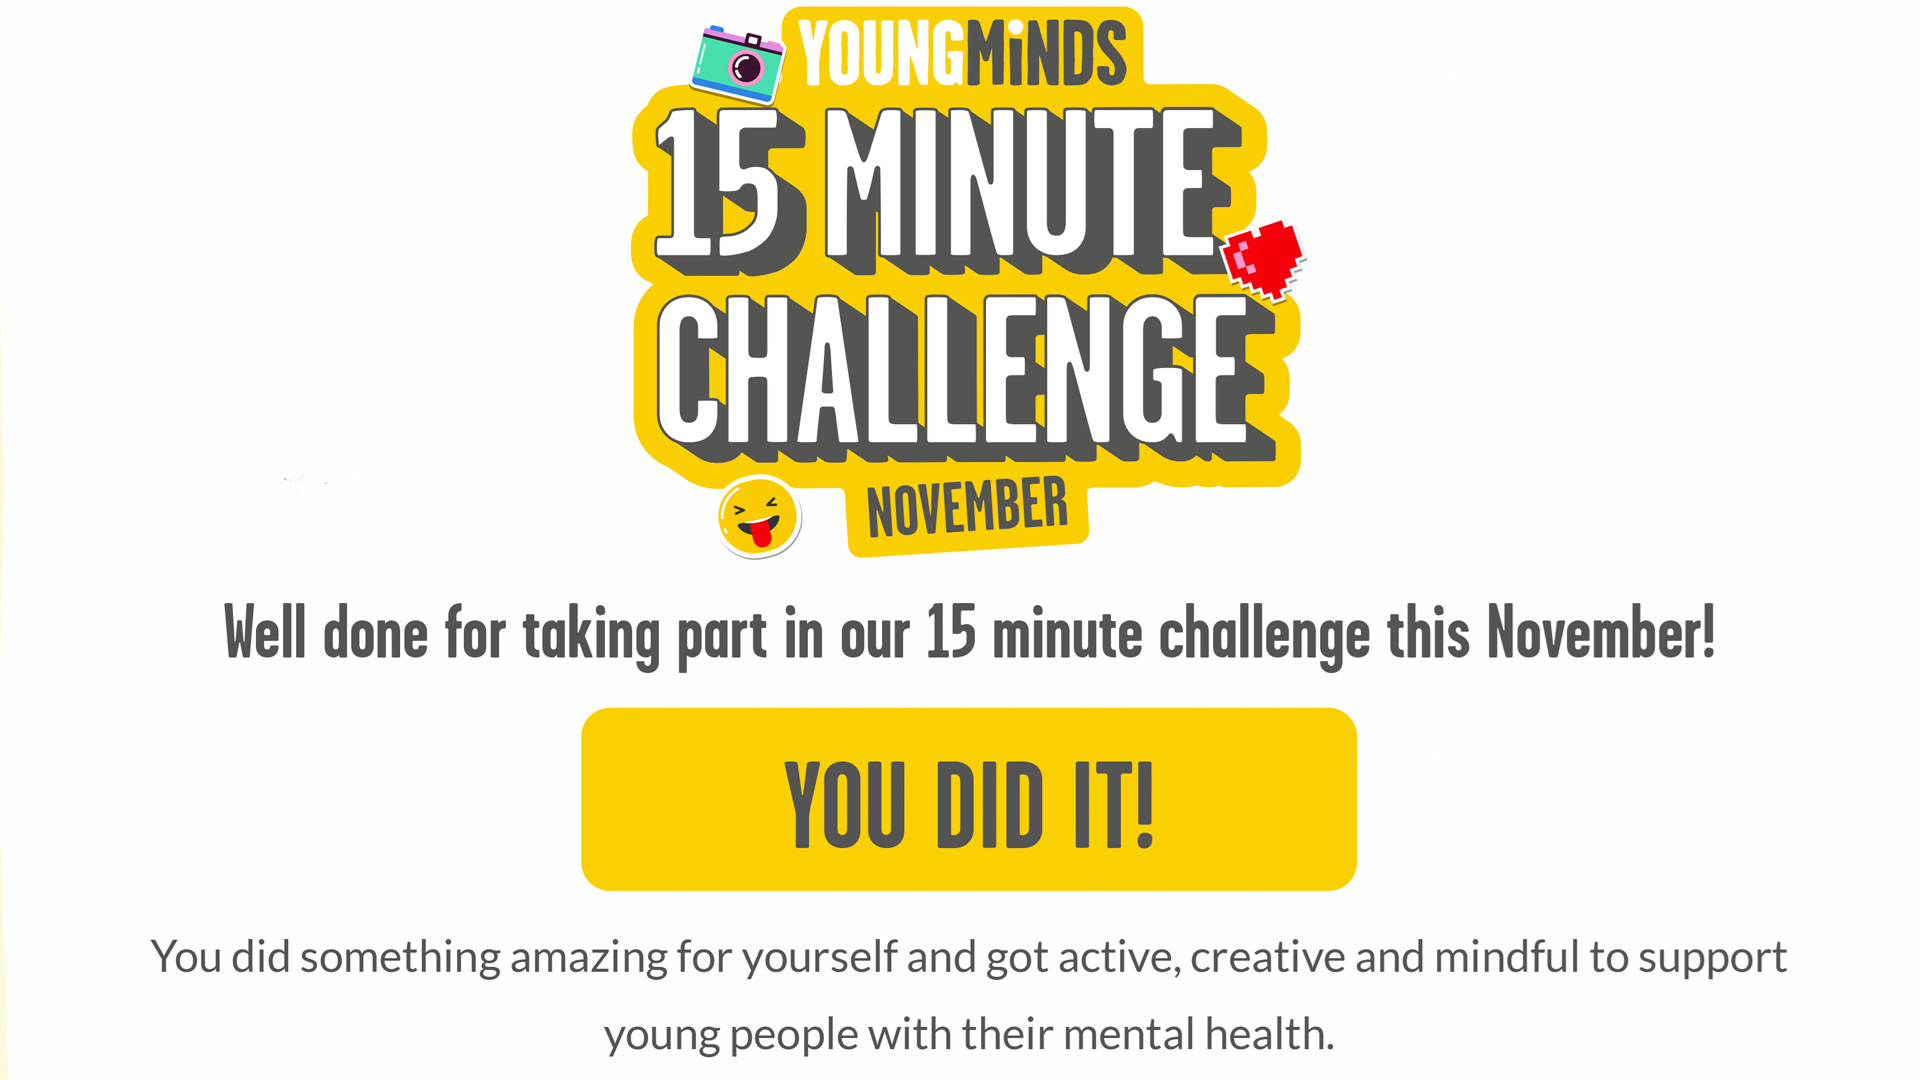 15 Minute Challenge. You did it!